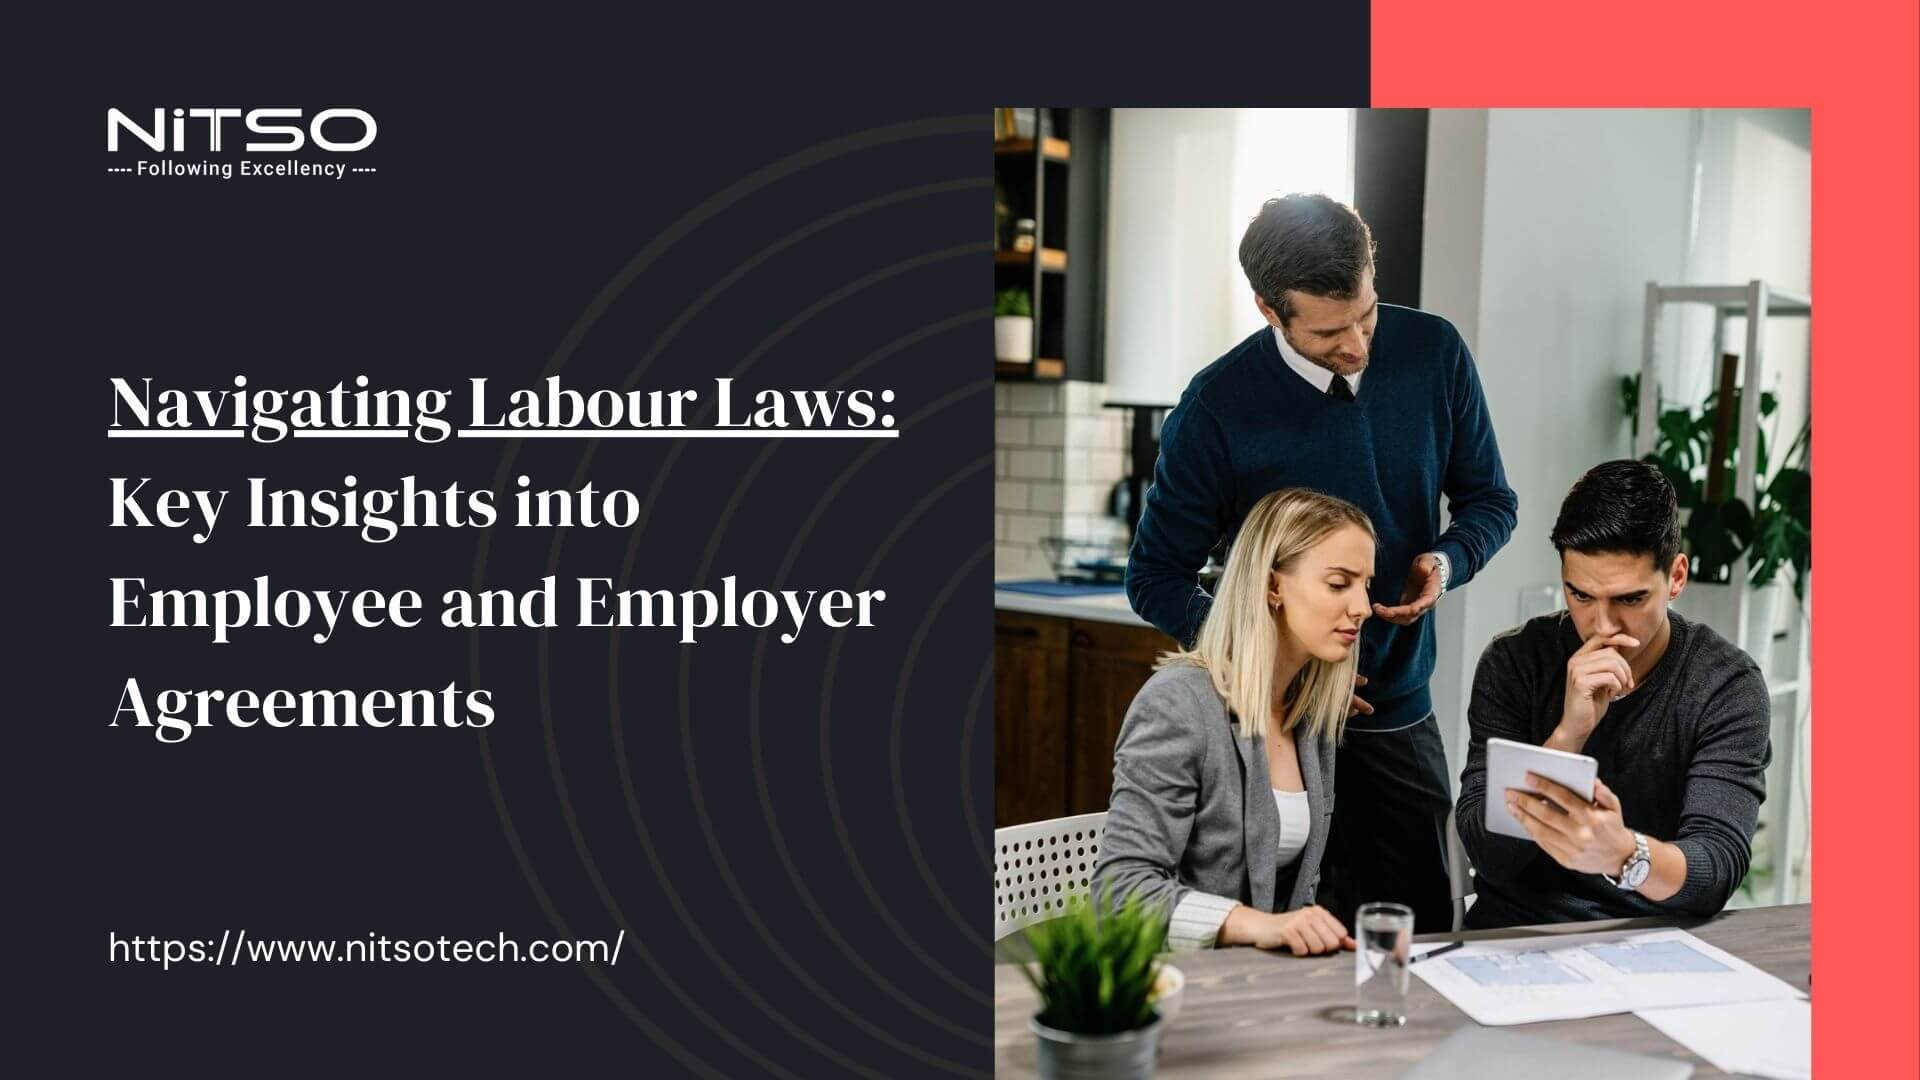 Navigating Labour Laws: Key Insights into Employee and Employer Agreements